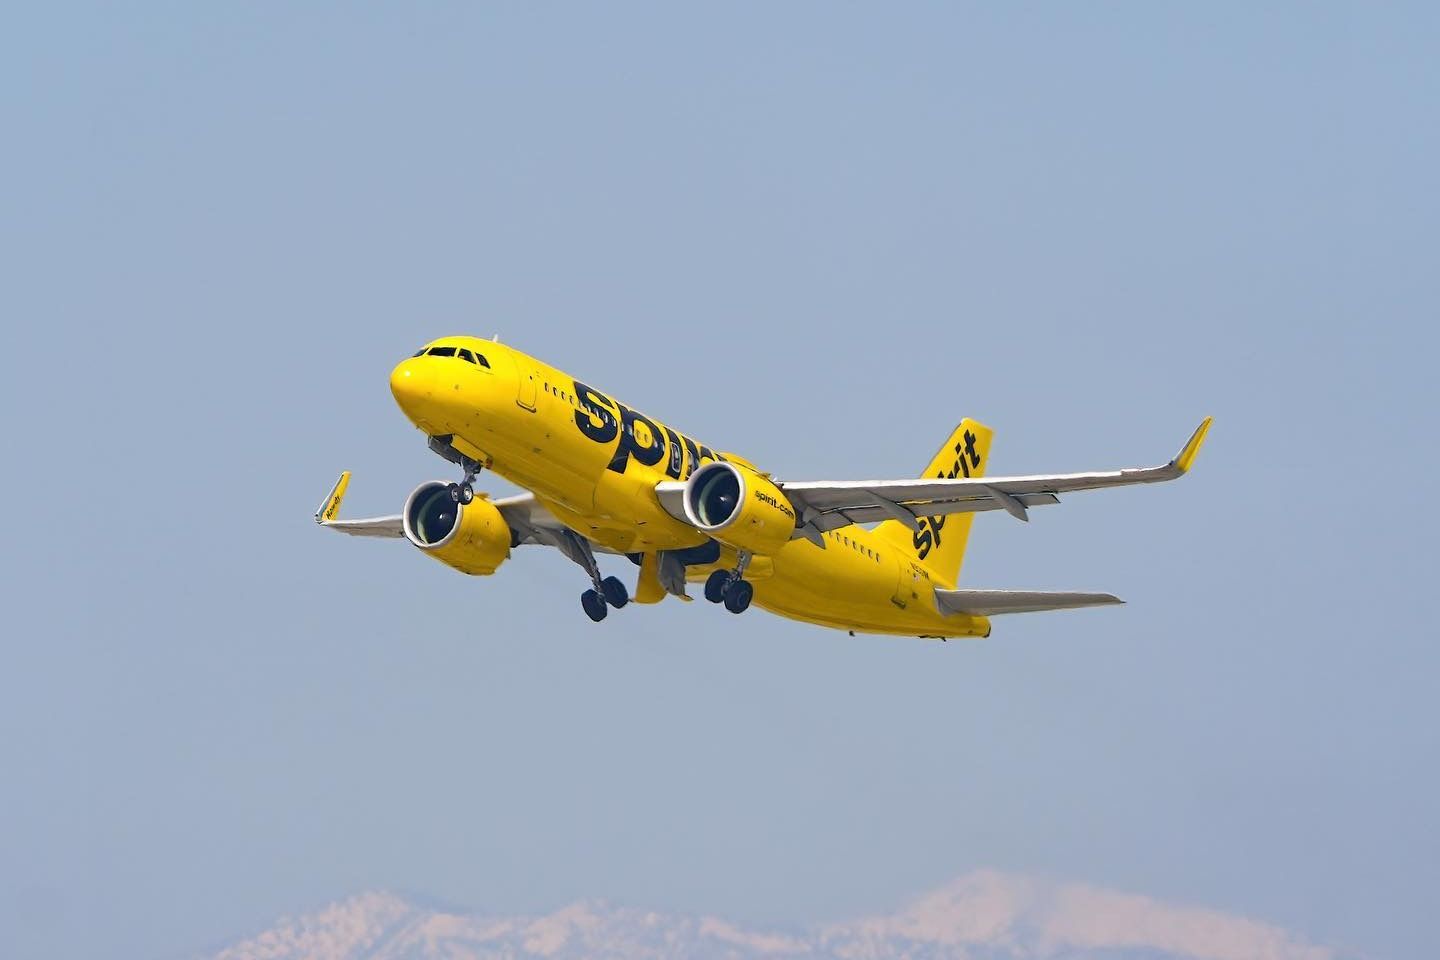 Spirit Airlines Airbus A320neo taking off.